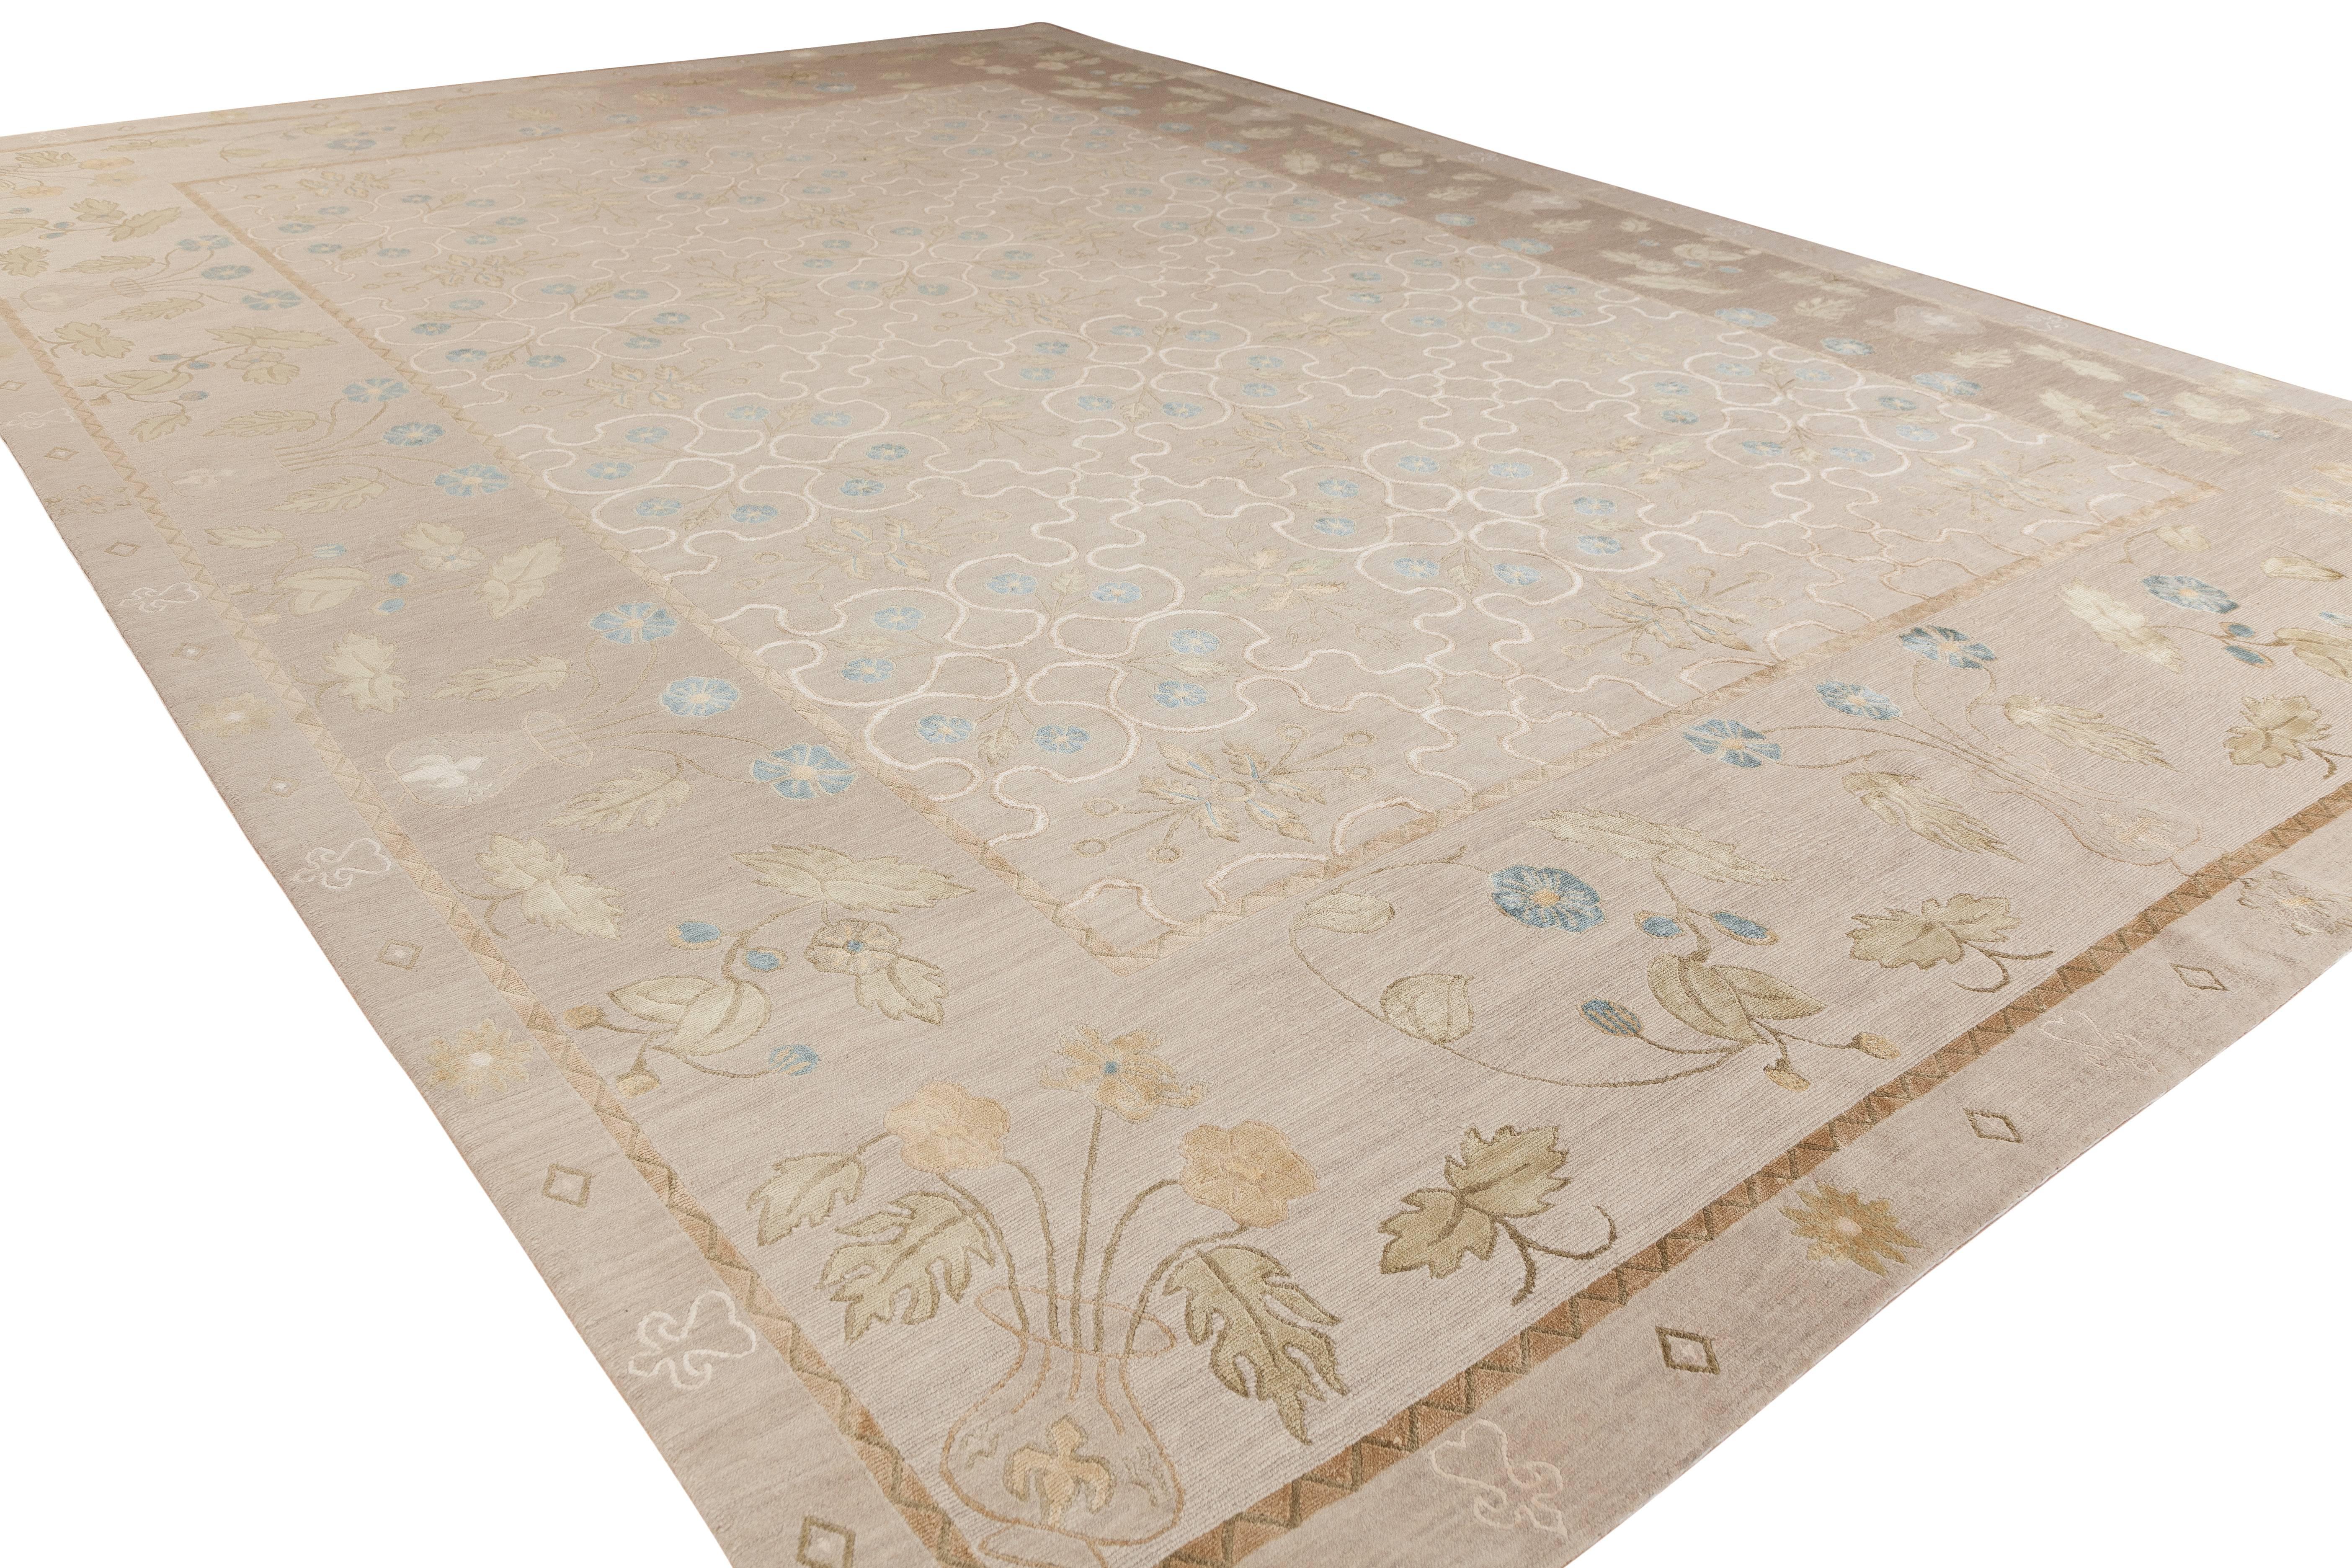 Named for our middle daughter, a truly universal design with European elegance and American style. In this particular coloration, the tan Tibetan wool background is offset by design motifs in Chinese silk, featuring shades of khaki, tan, peach,